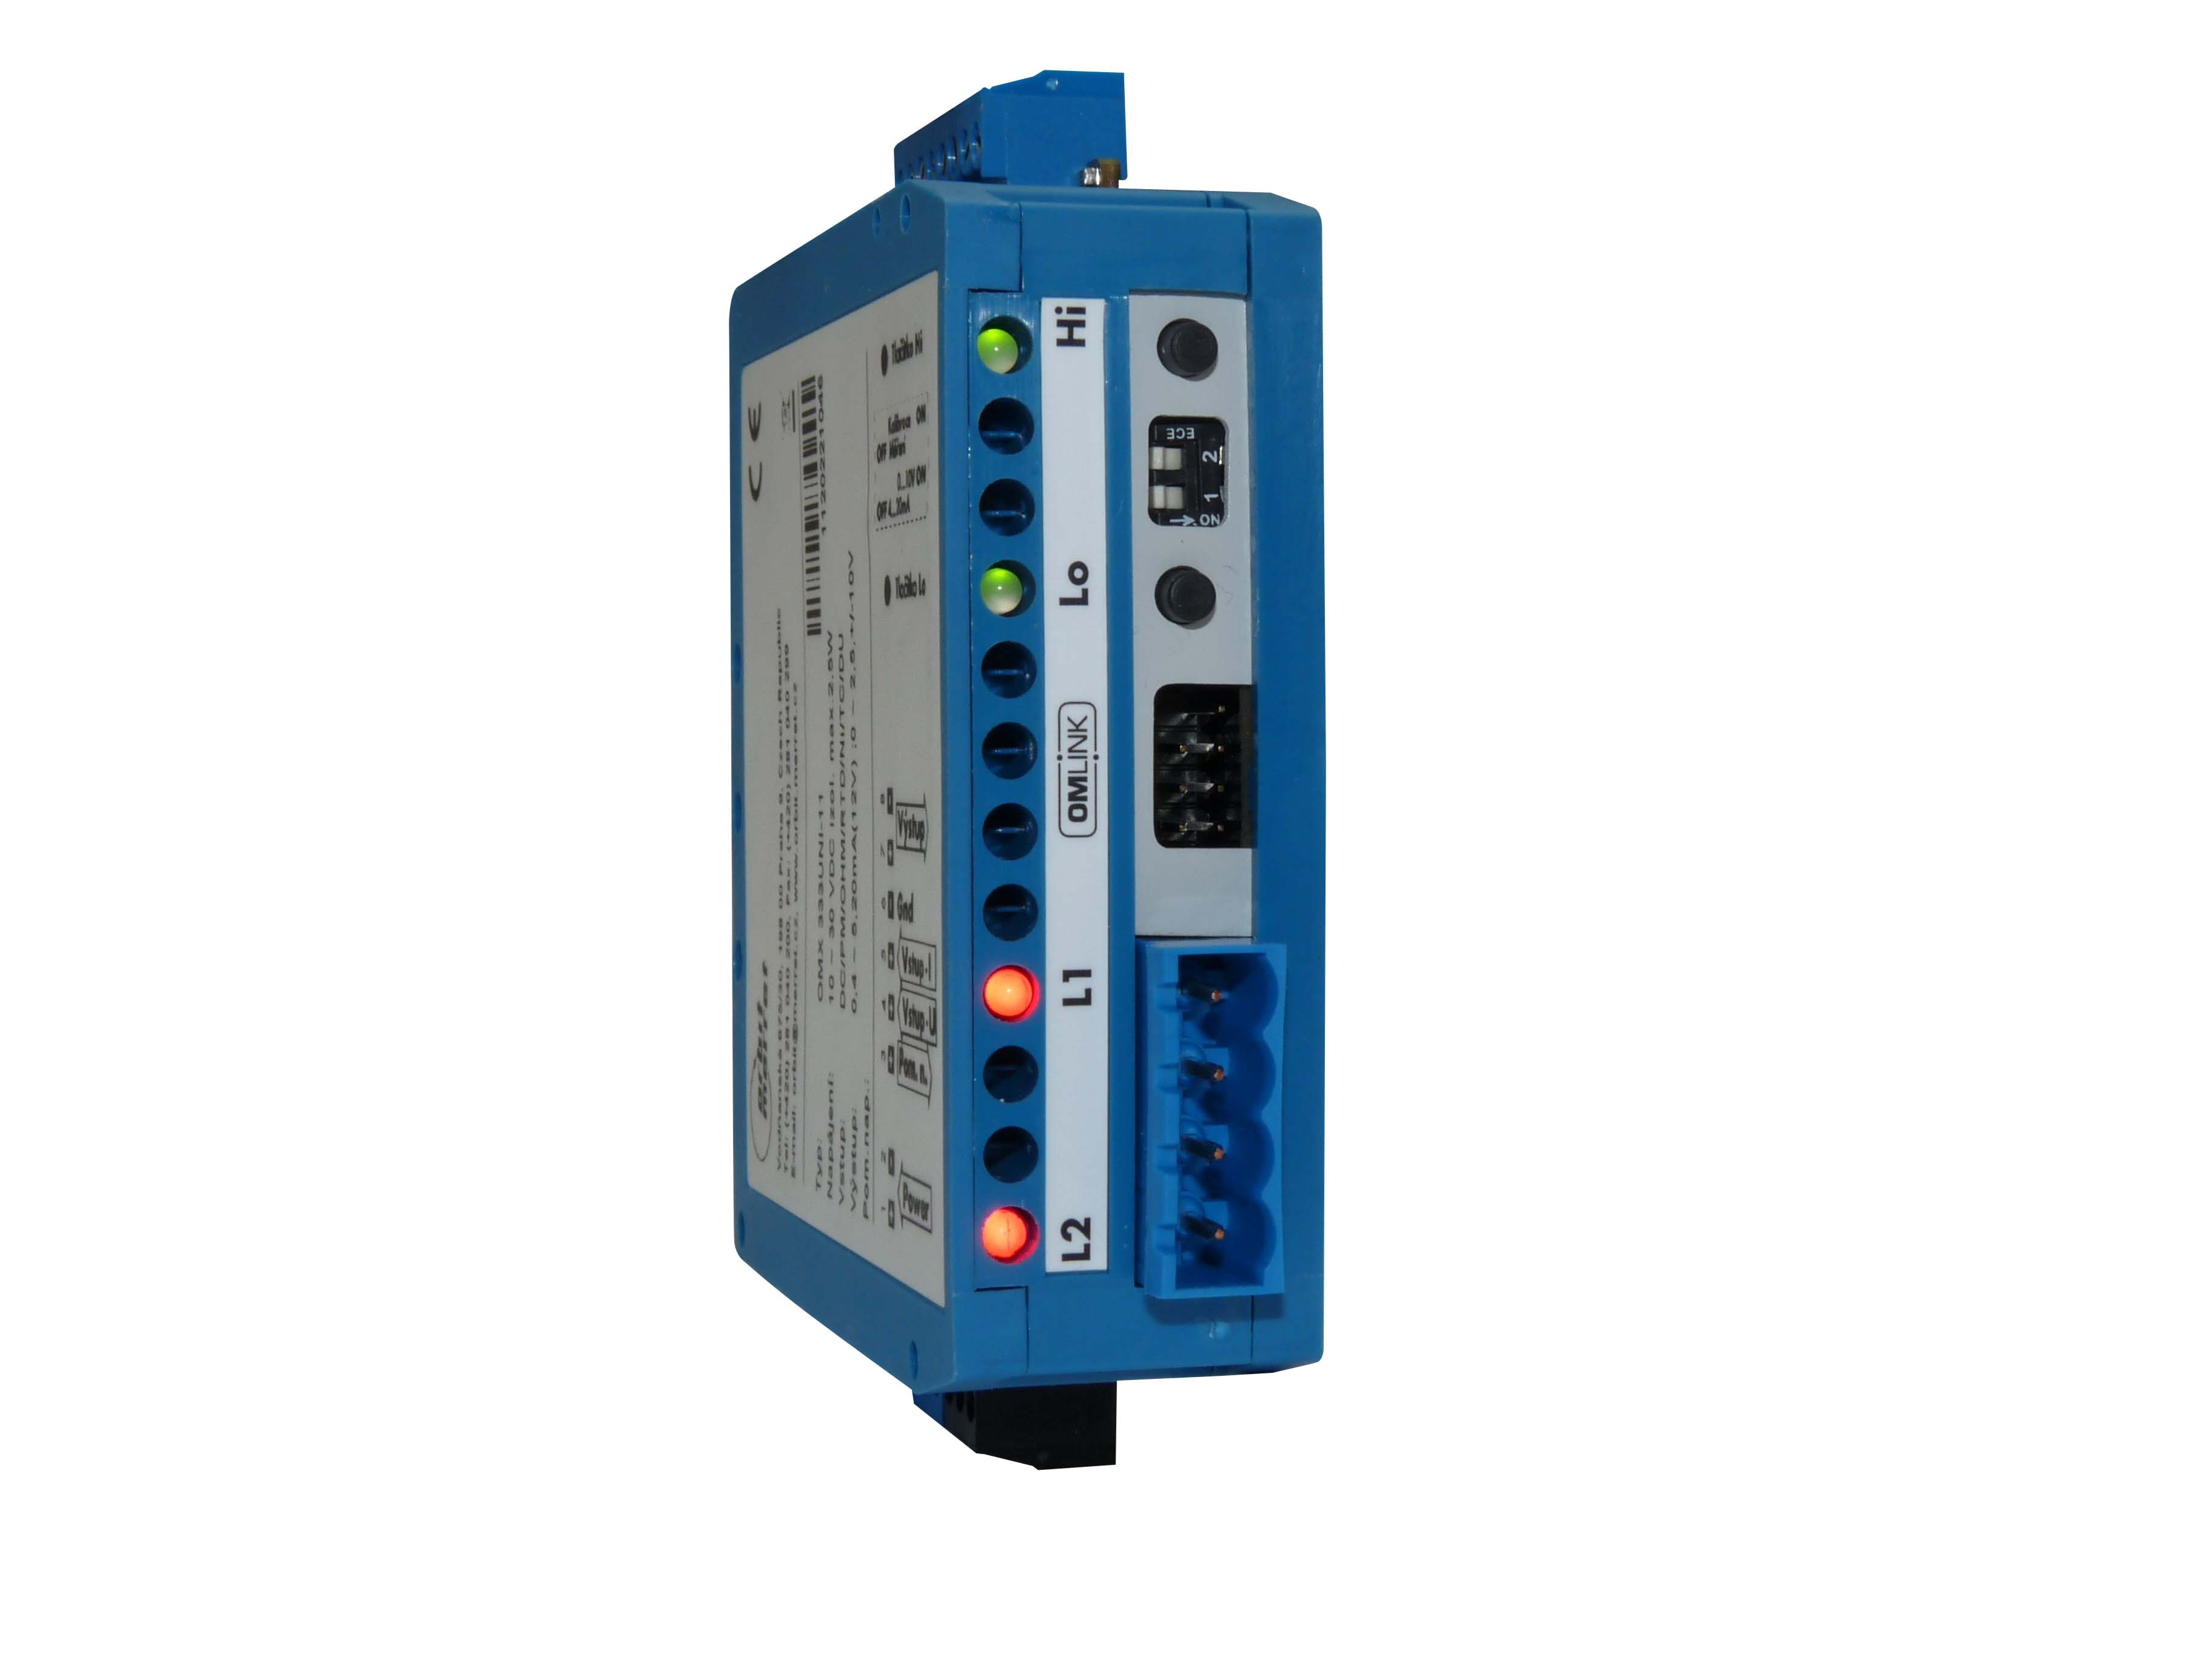 OMX 333DC, Programmable Isolated DC Voltmeter and Ammeter